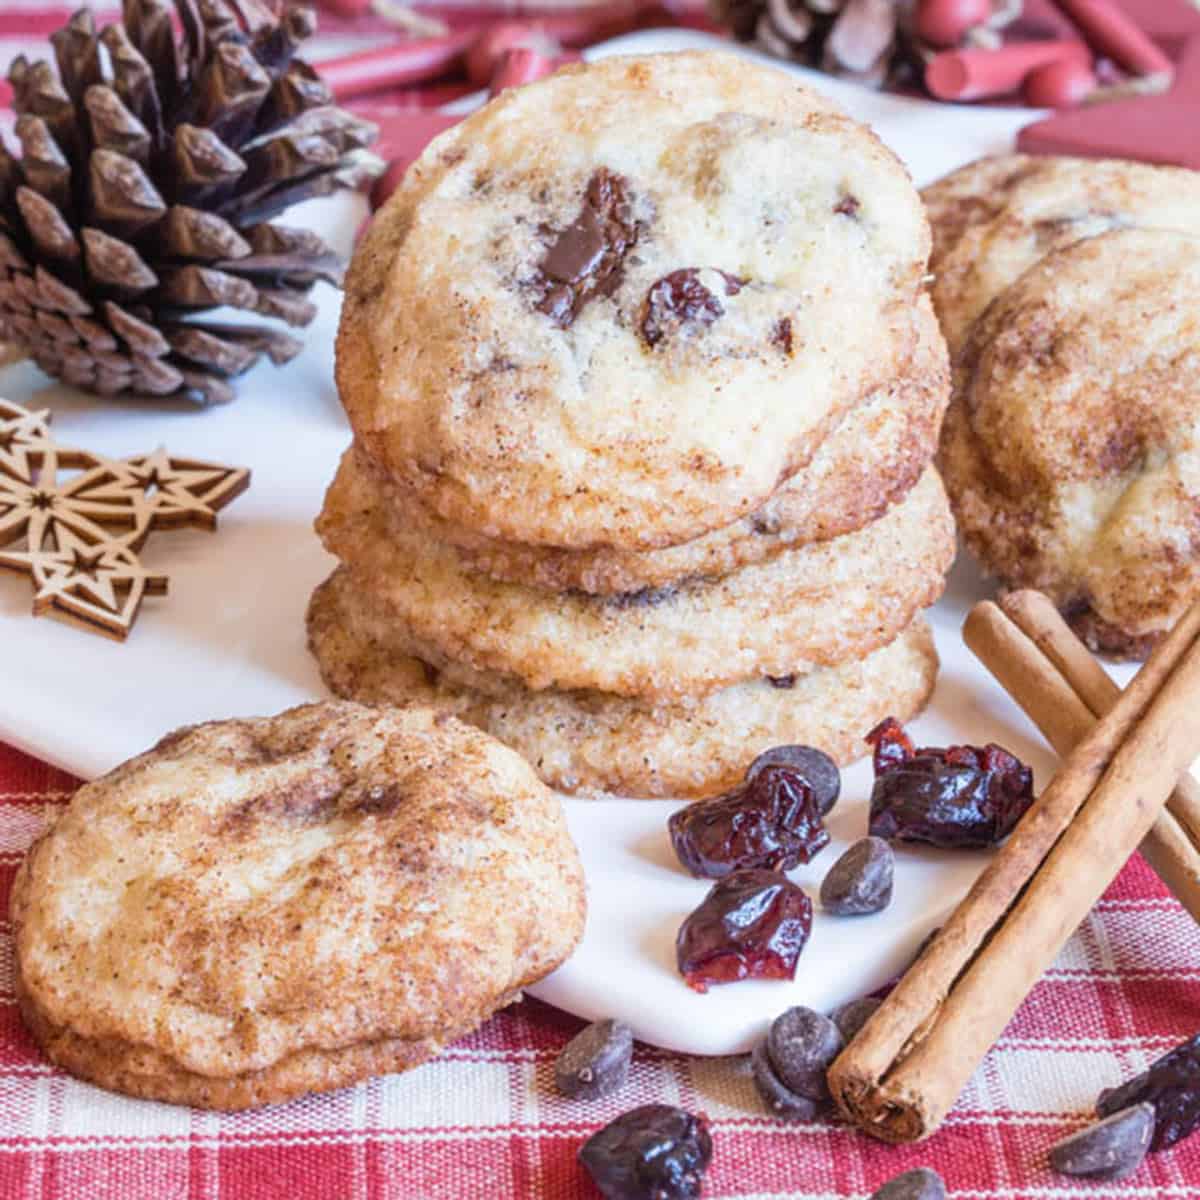 A stack of cookies next to a pine cone with cinnamon sticks.